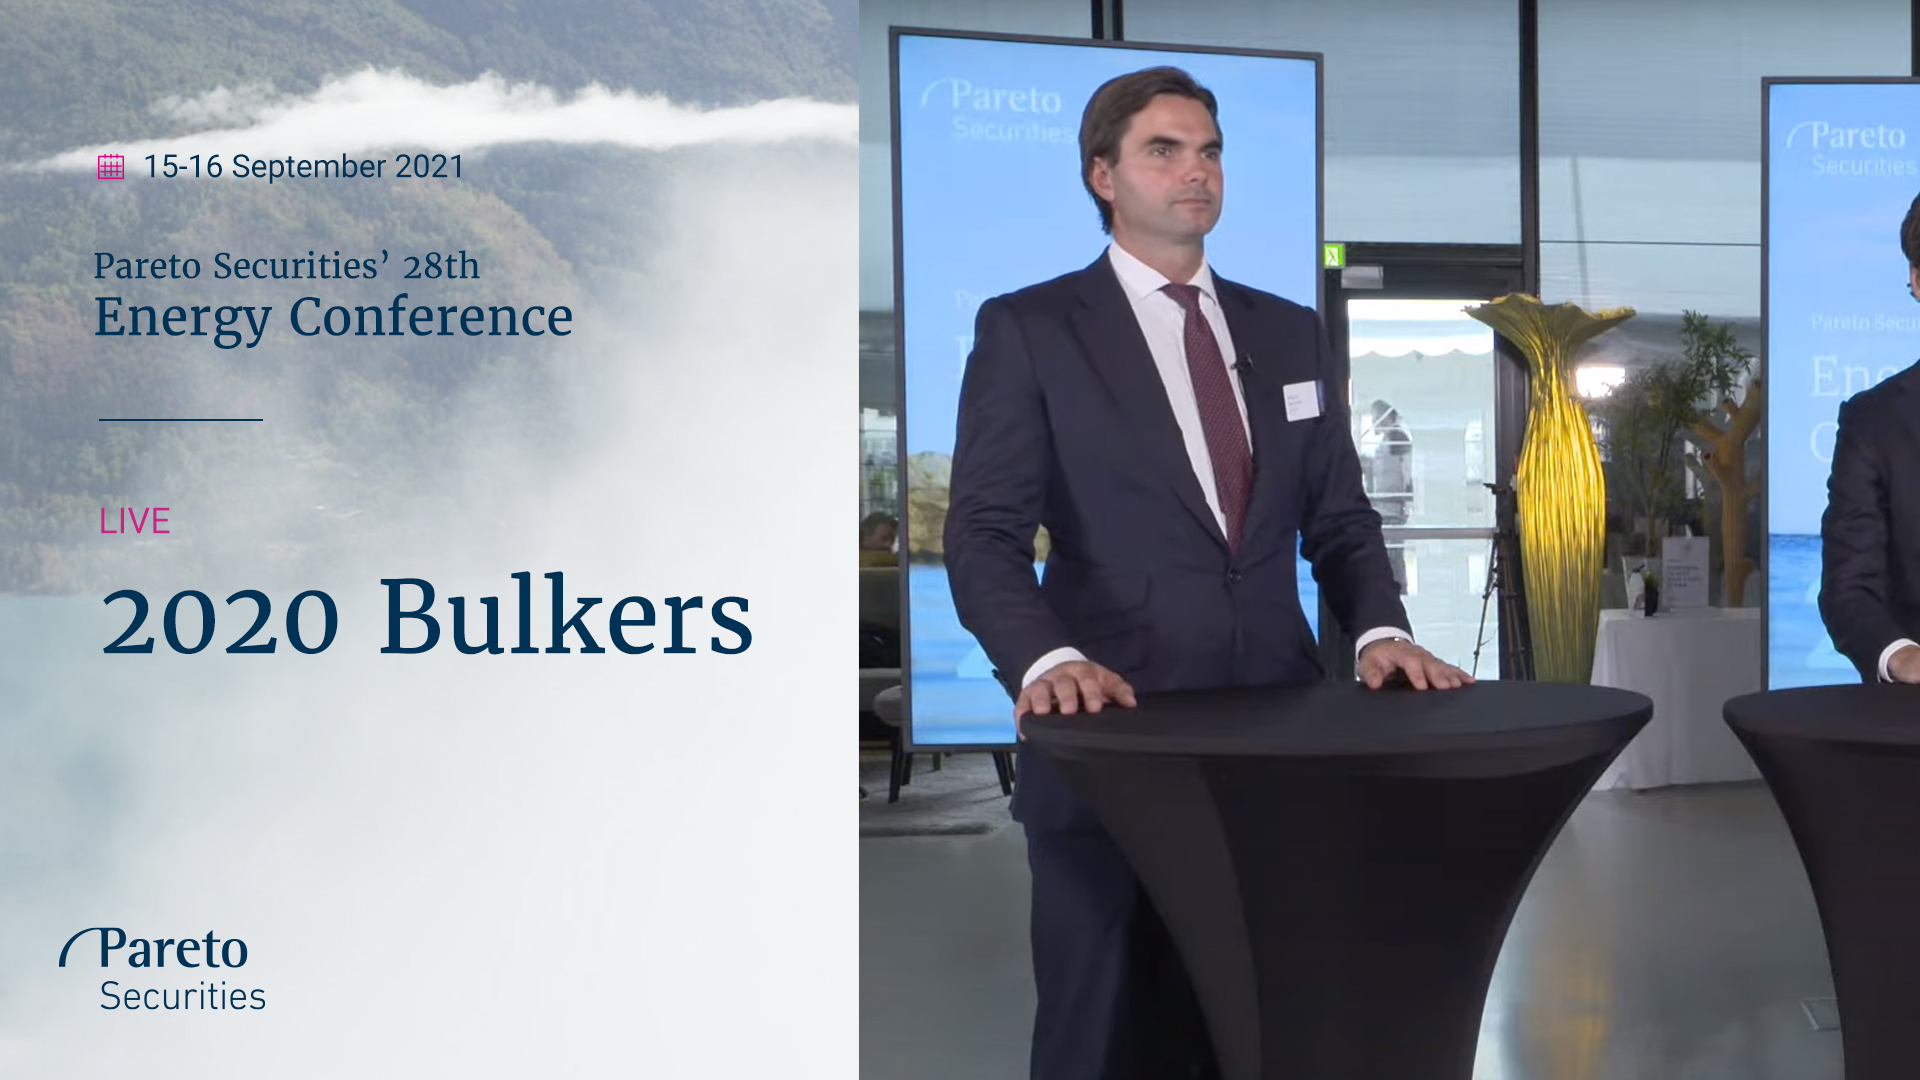 2020 Bulkers: Live från Pareto Securities’ 28th Energy Conference